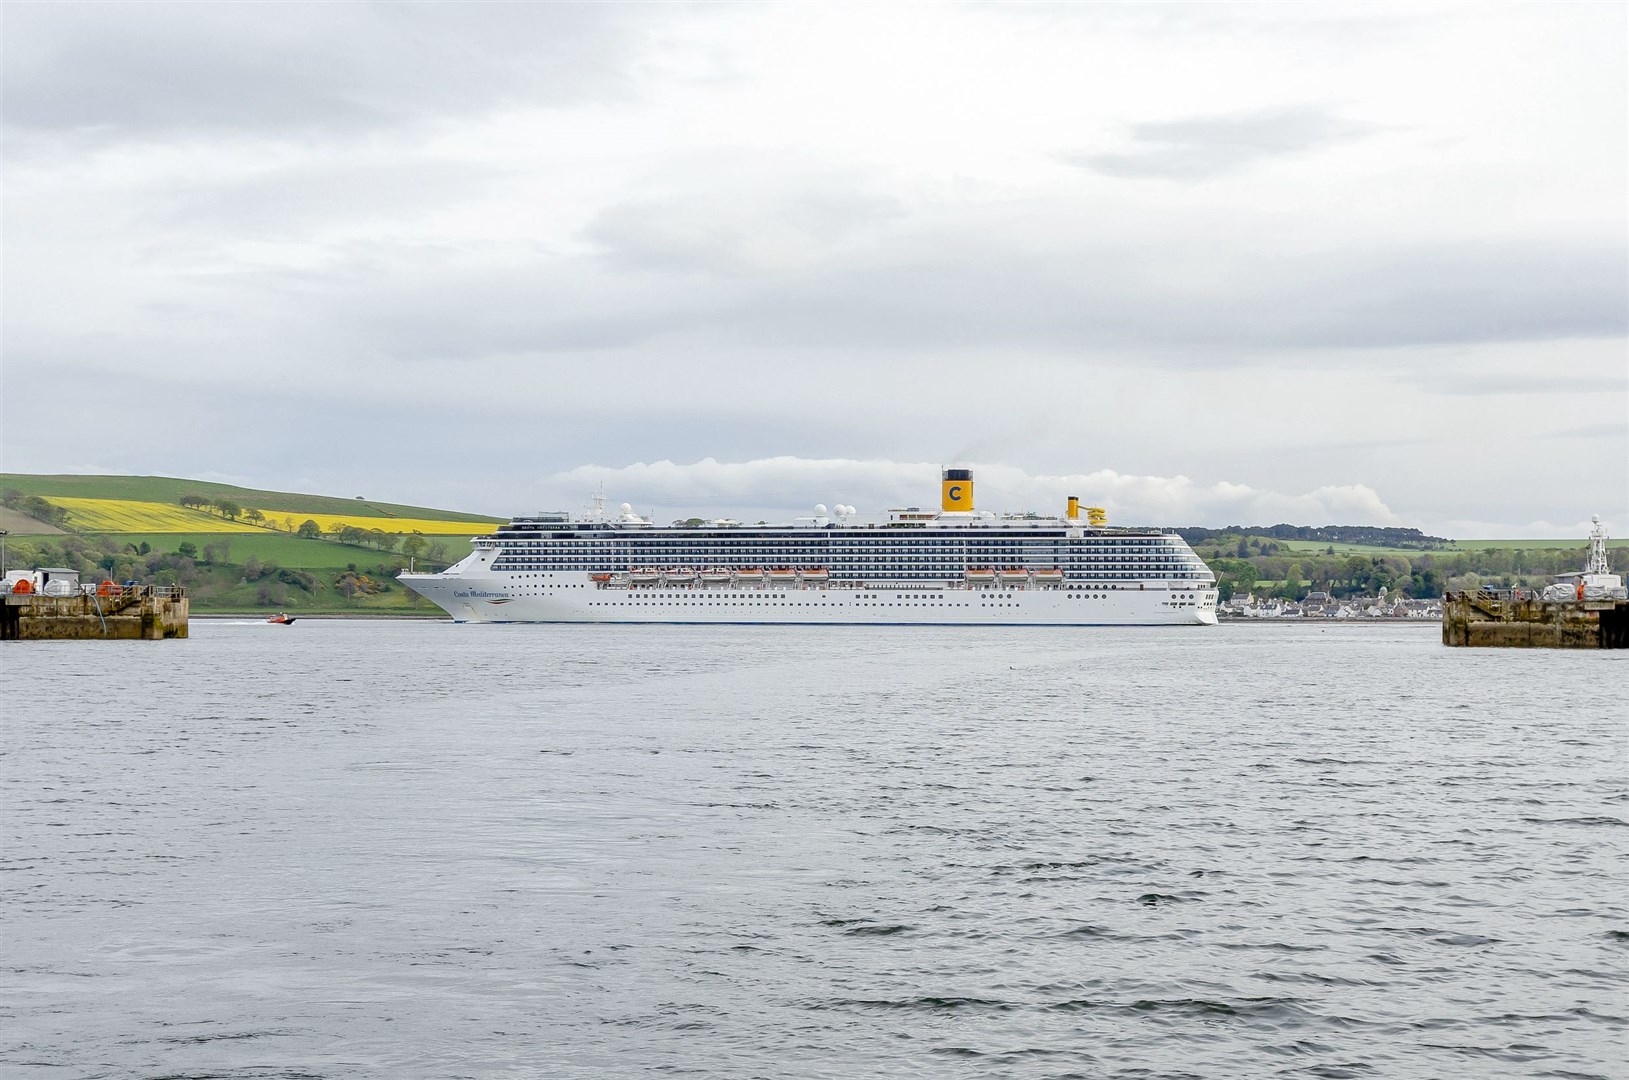 MV Costa Mediterranea visiting the Cromarty Firth in 2019. Image by: Malcolm McCurrach | © Malcolm McCurrach 2019 New Wave Images UK.